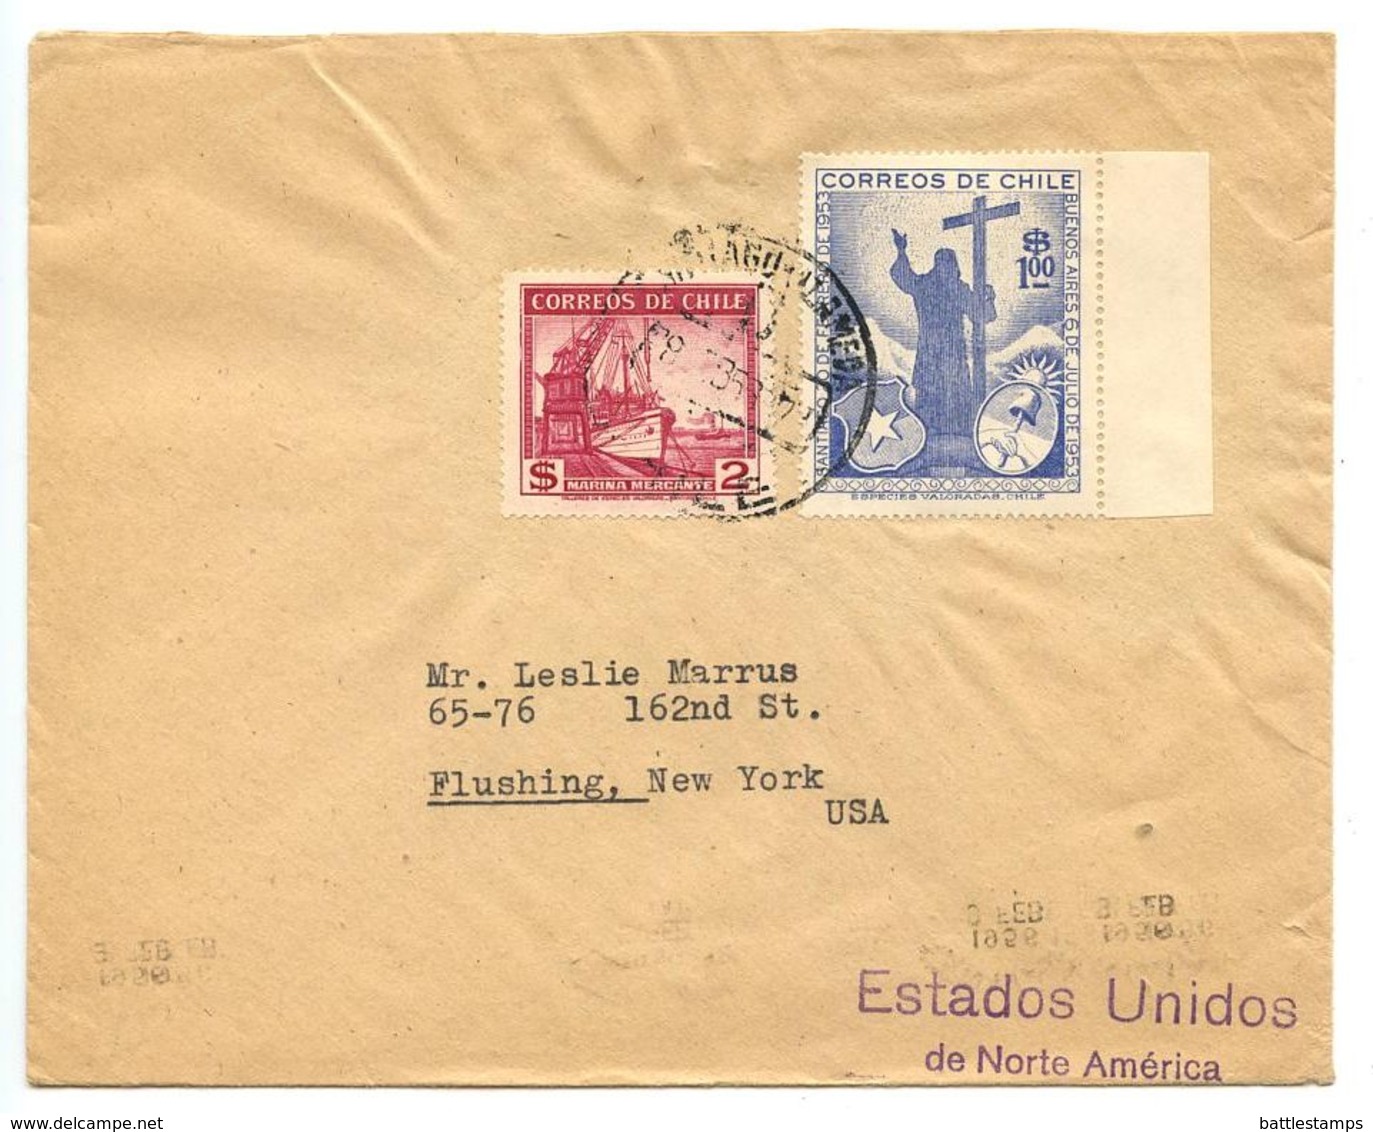 Chile 1950‘s 3 Covers Santiago To Flushing NY, Mix Of Stamps - Chile